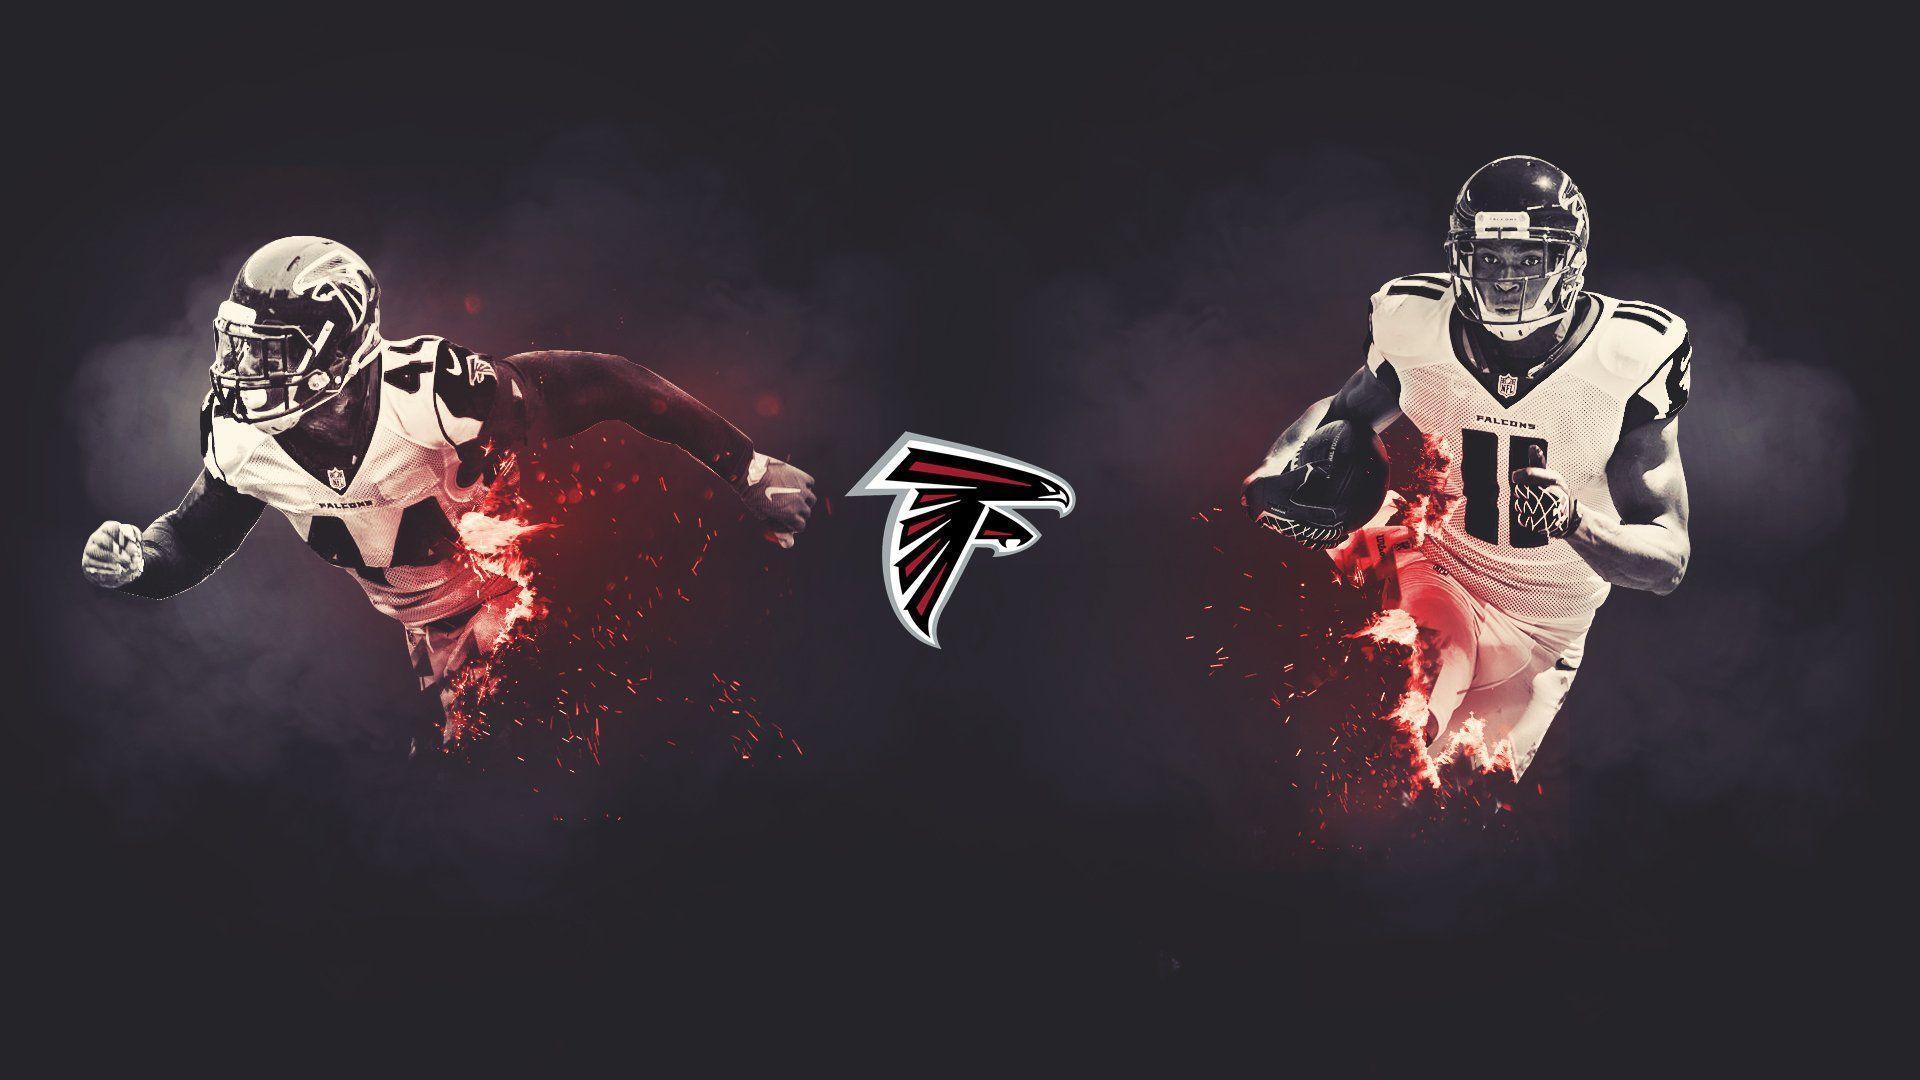 I Made Another Falcons Wallpaper. Feel Free To Use. 1920x1080